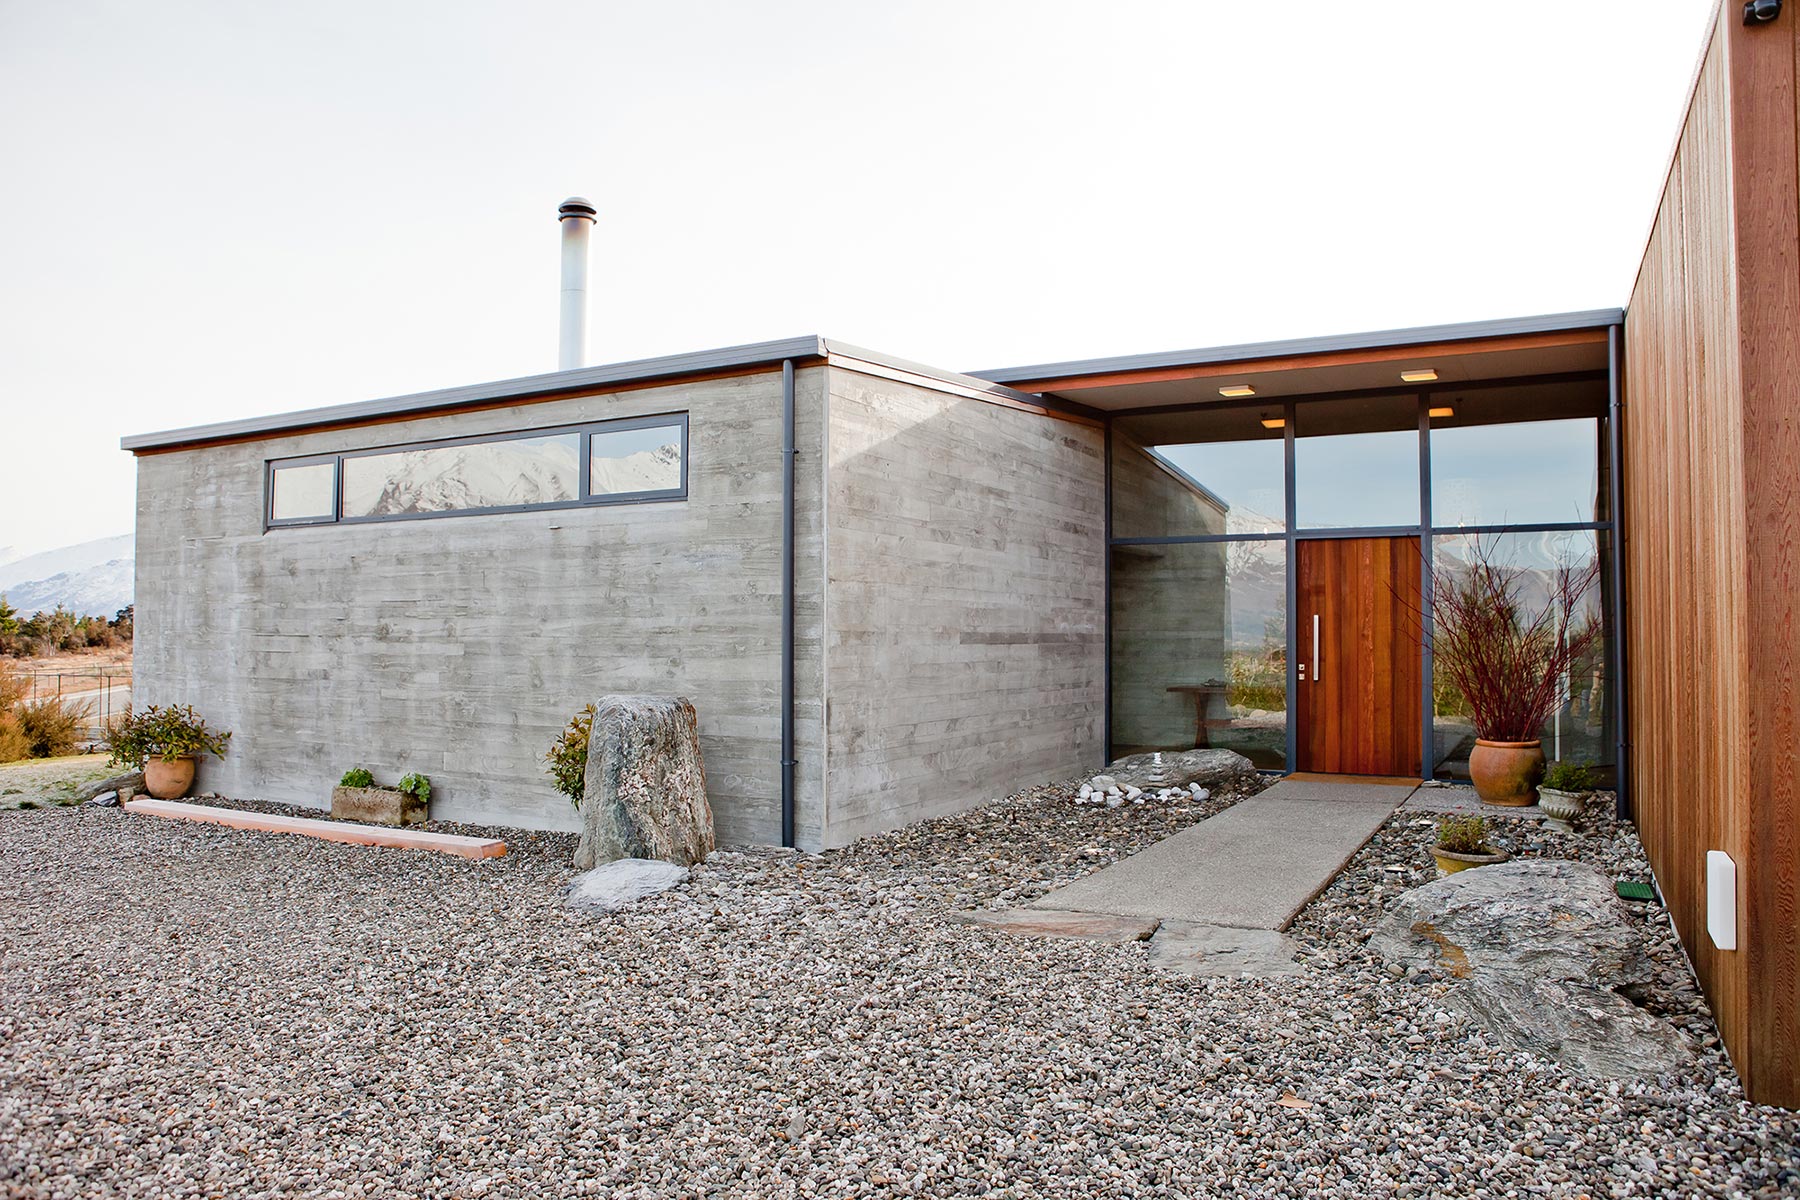 Rafe Maclean 
Architects Mt Gold House